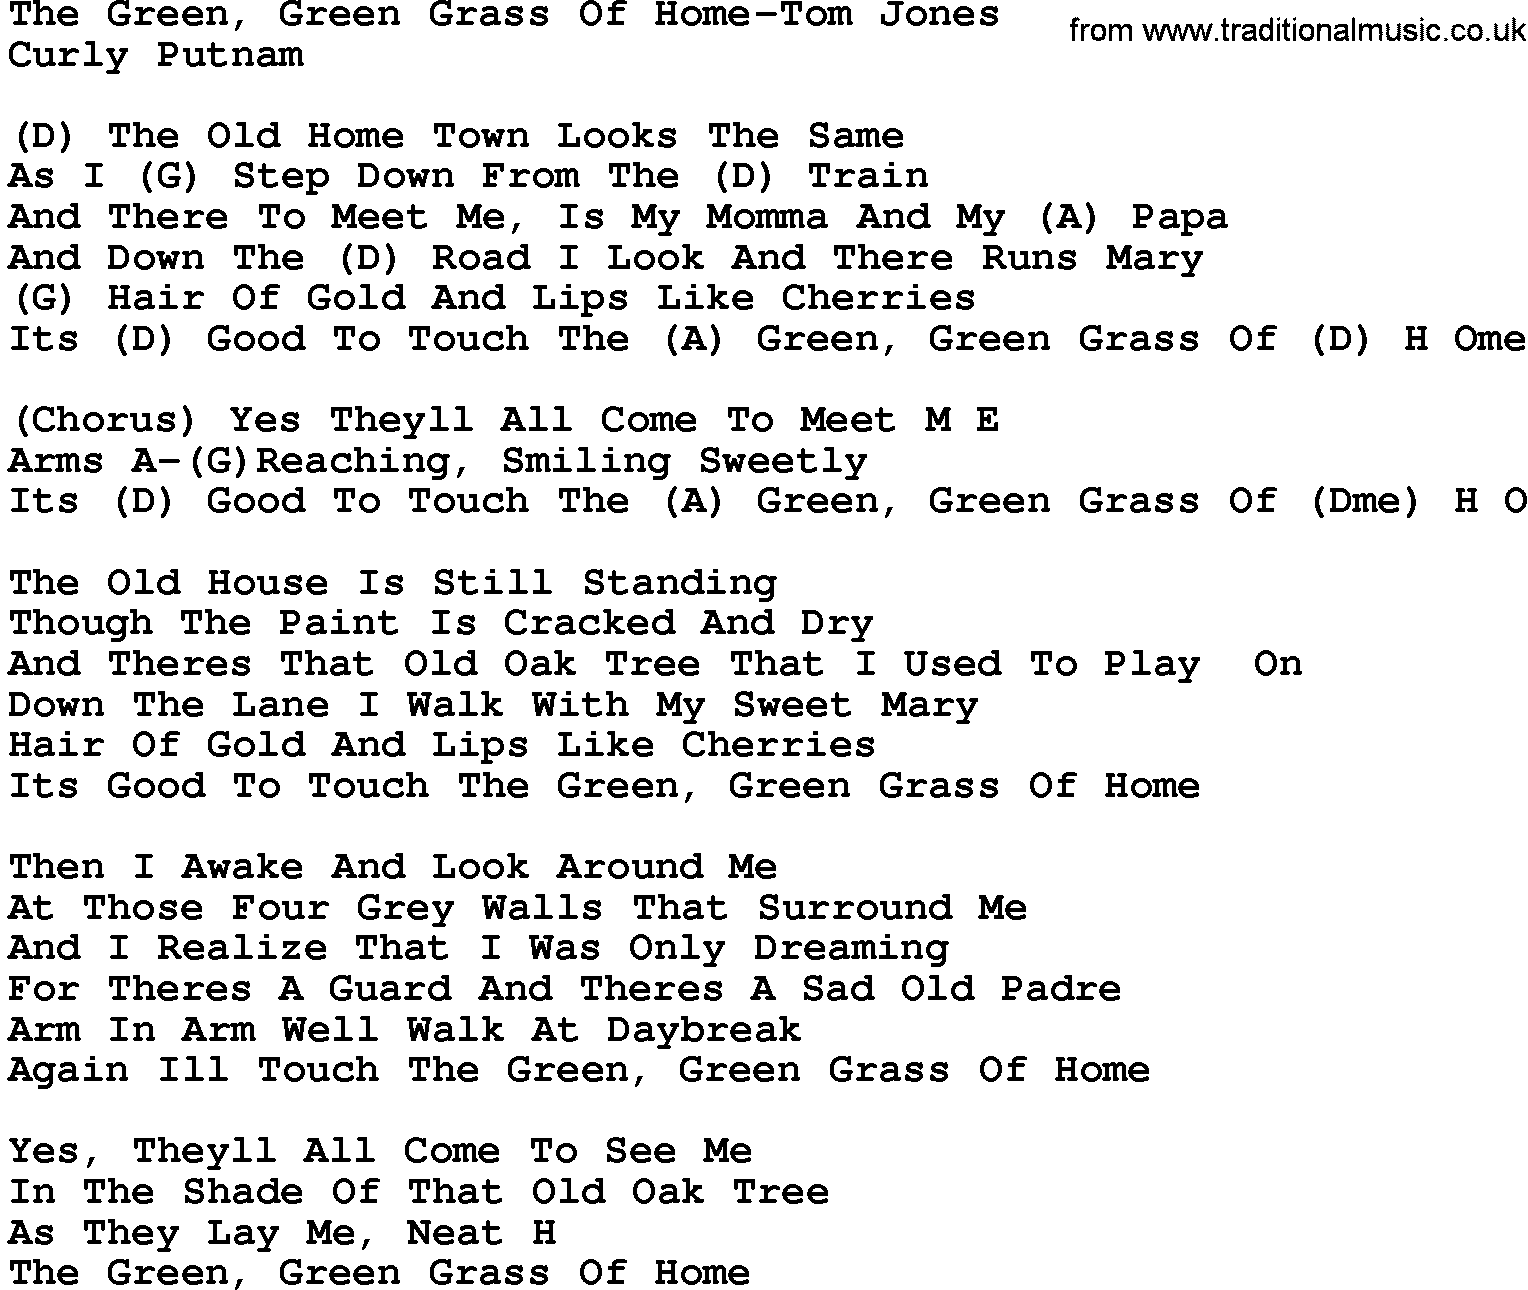 Country music song: The Green, Green Grass Of Home-Tom Jones lyrics and chords